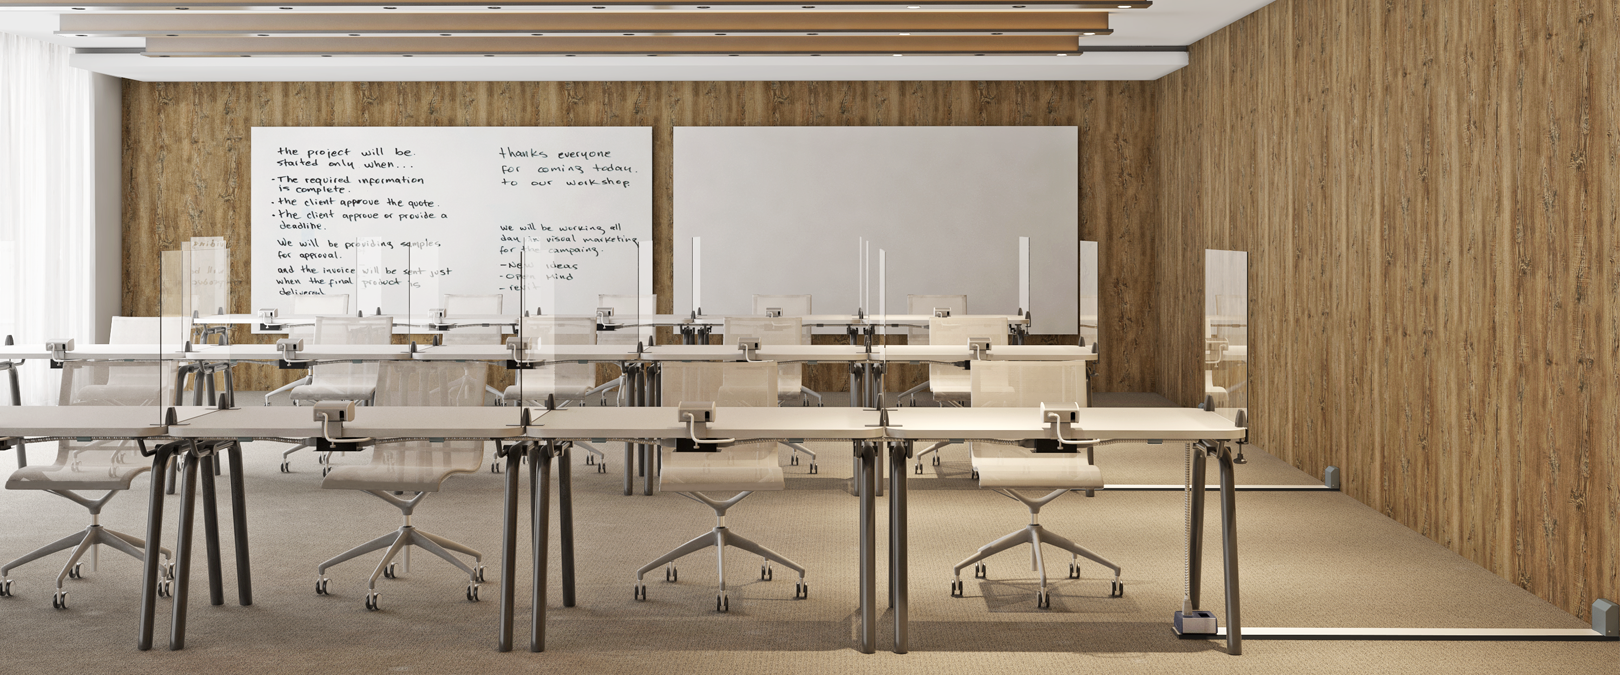 MLS-Classroom-1620x675 Expert Coaching and the Benefits of Quantified Learning - FSR, Inc. - AV Connectivity Solutions